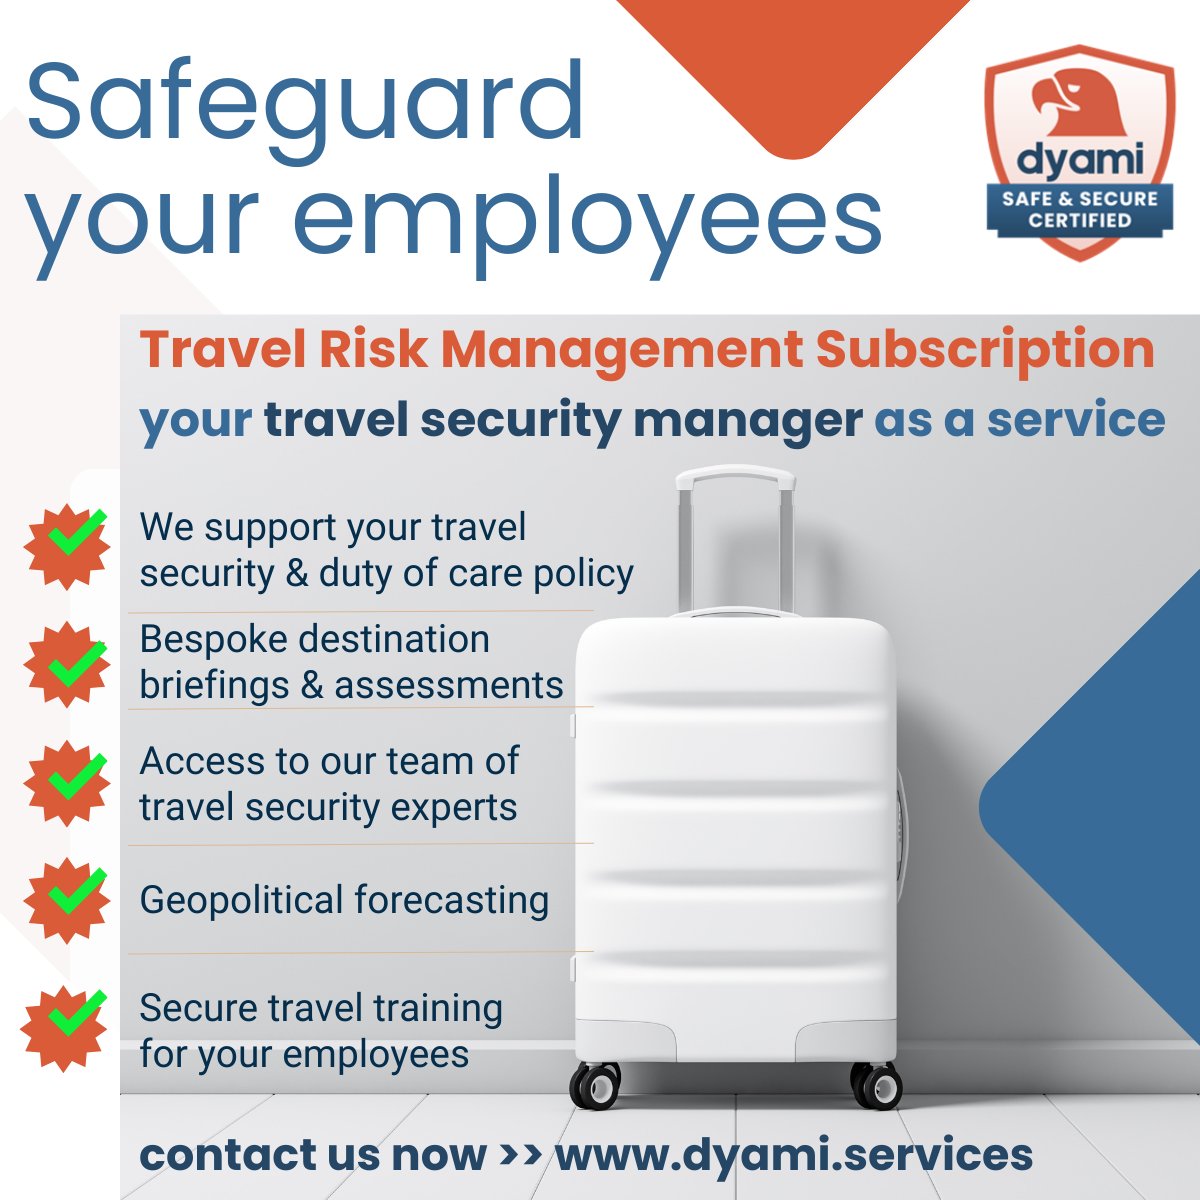 Safeguard your business travelers. Clients who choose the dyami travel risk management solution receive comprehensive access to our security and analyst specialists like we are part of your team.

#travelsecurity #employeesafety #espionage #dutyofcare #dyami